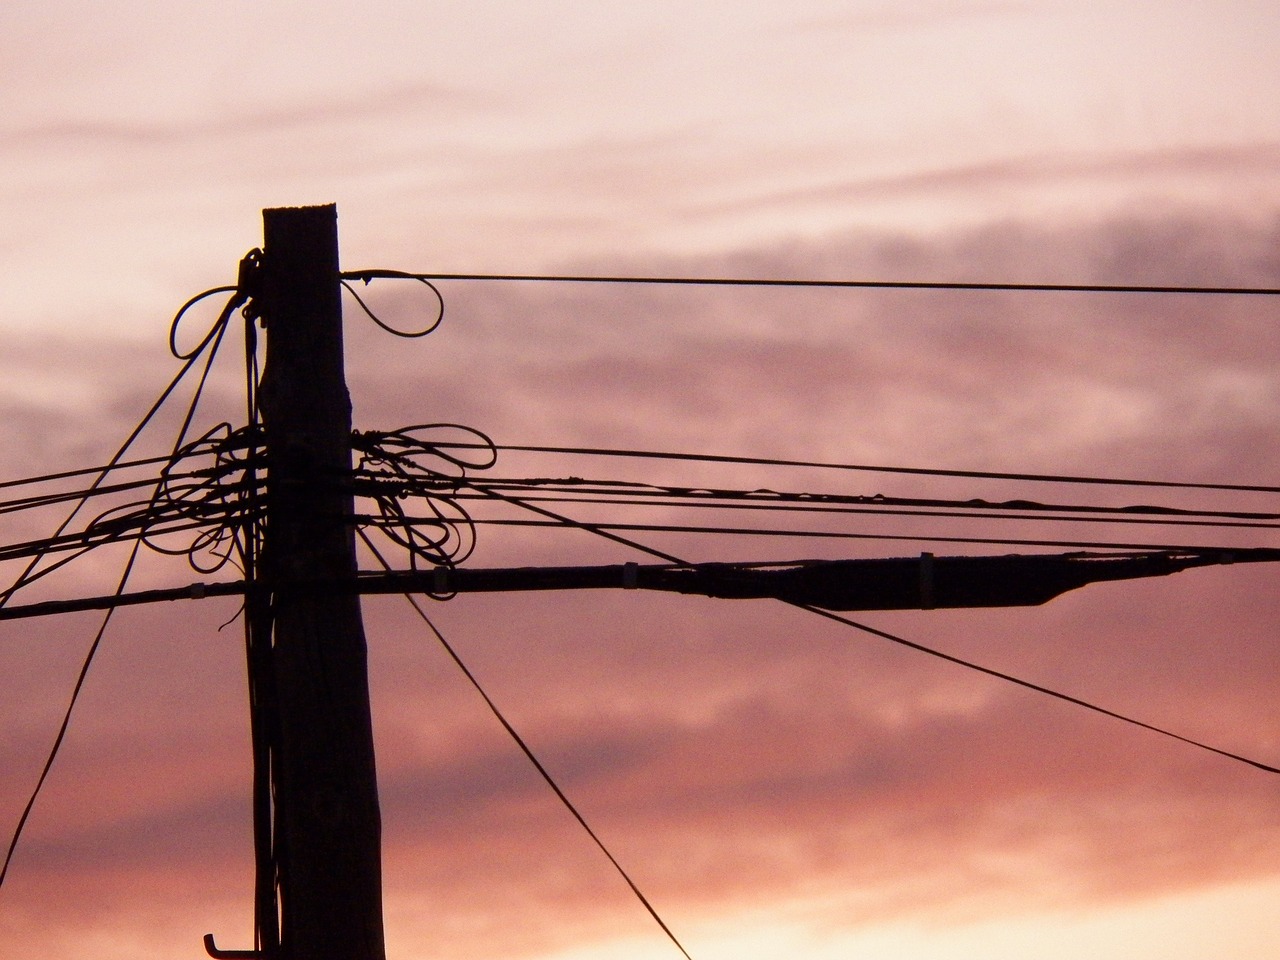 Image - wires sunset electricity sky lines